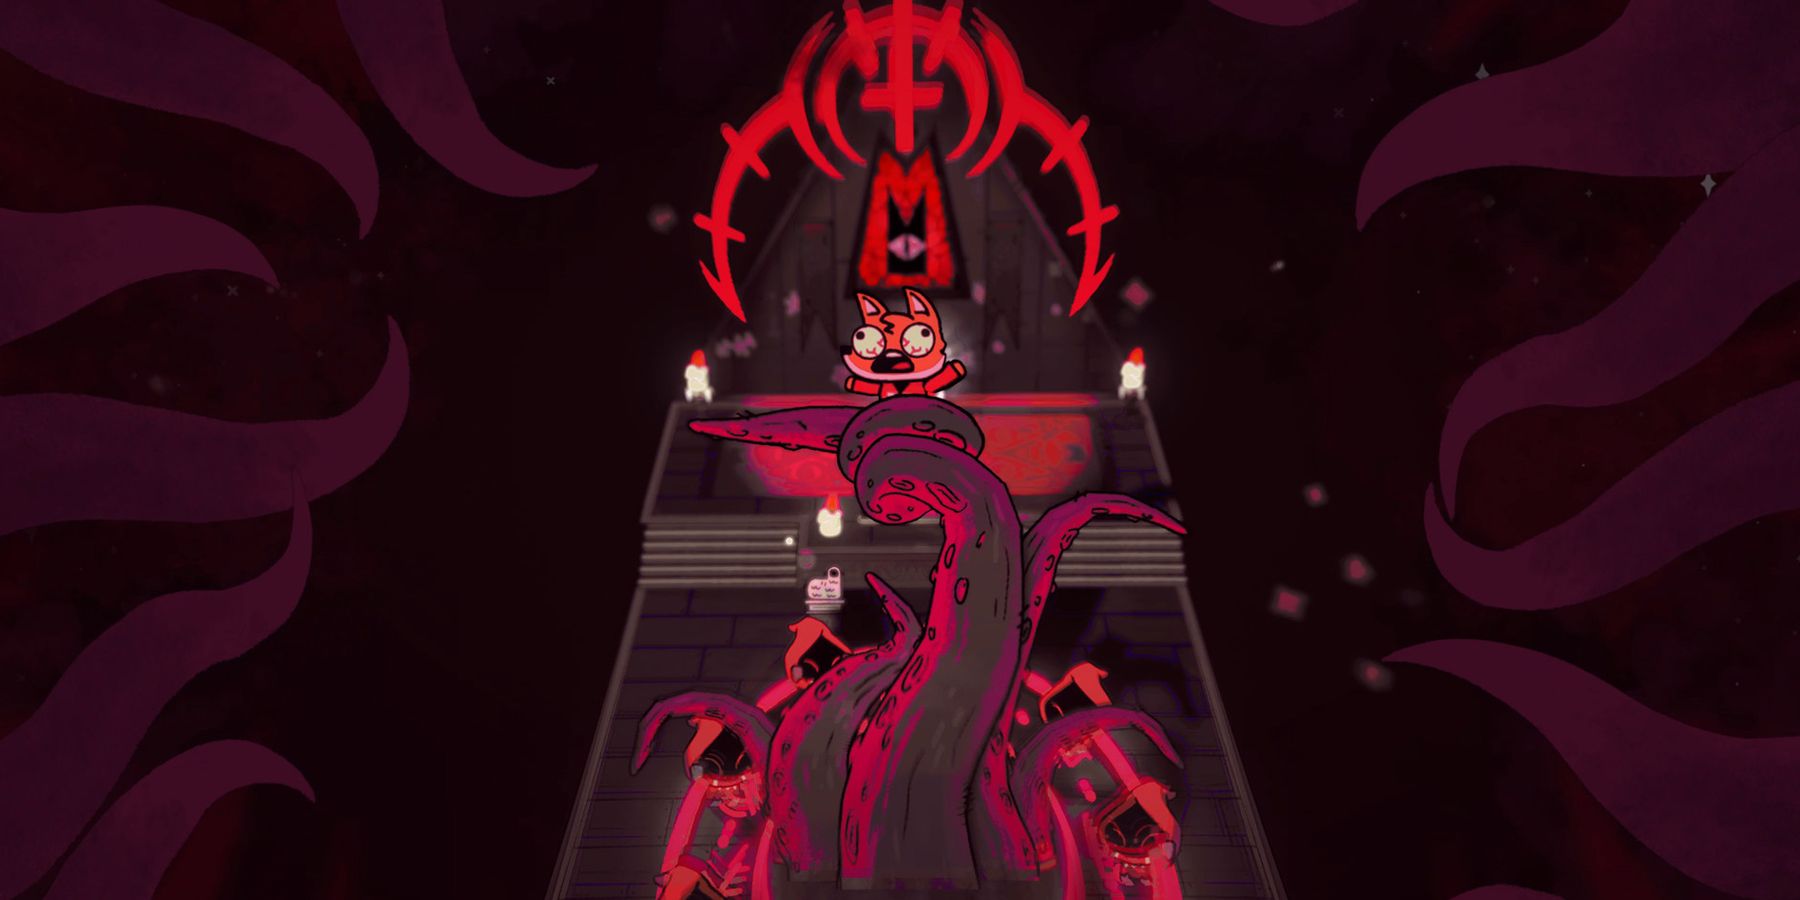 A tentacle monster pulls a fox character into a portal in Cult of the Lamb.